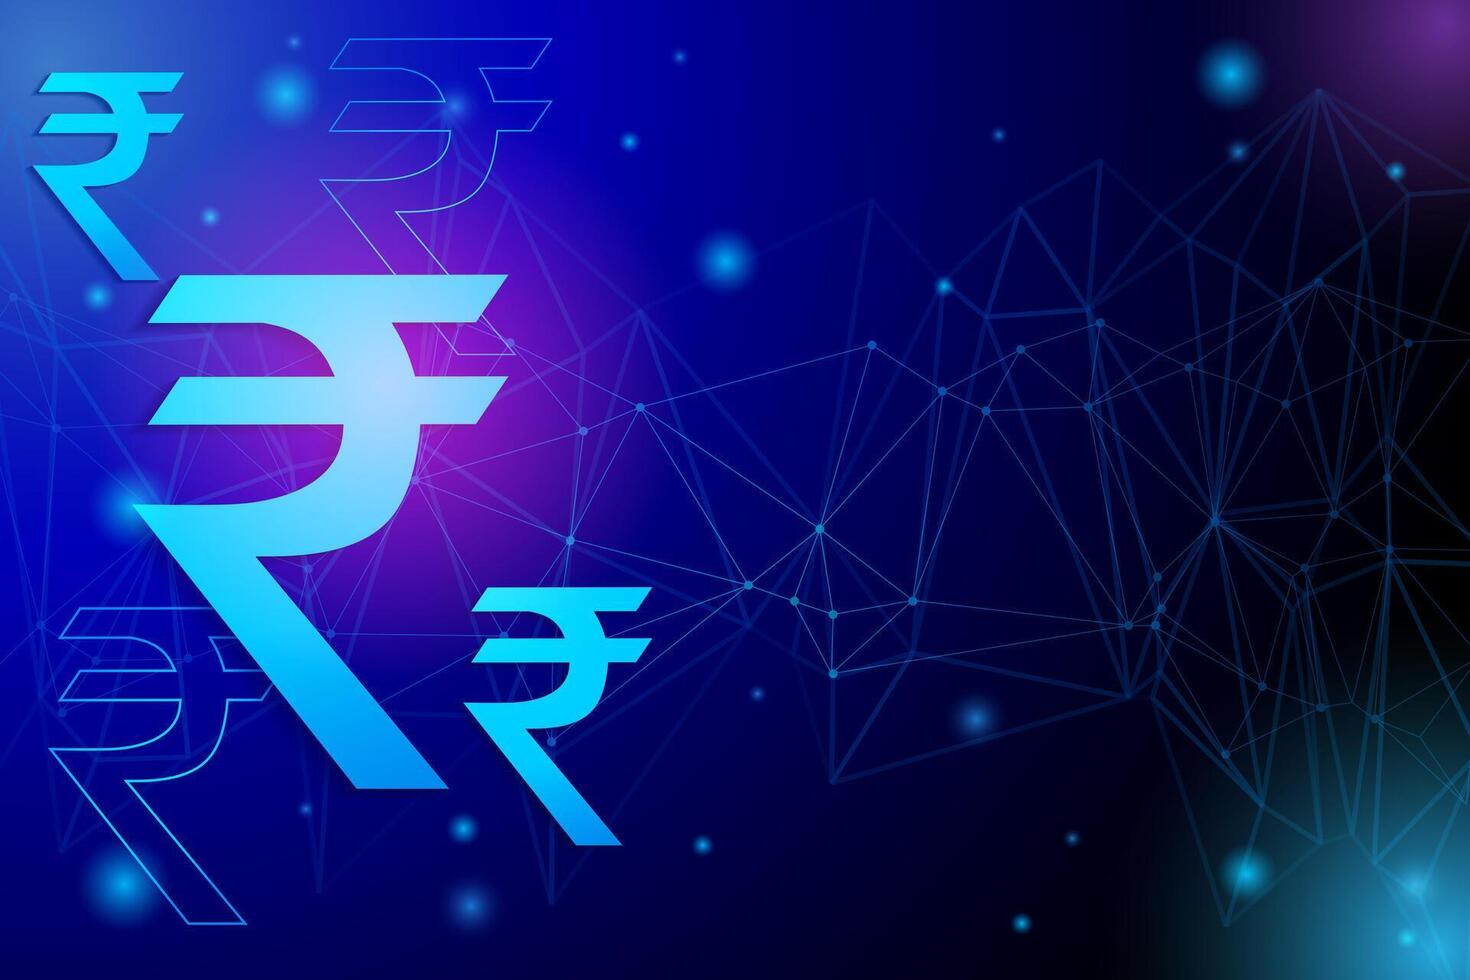 digital rupee indian currency technology background vector